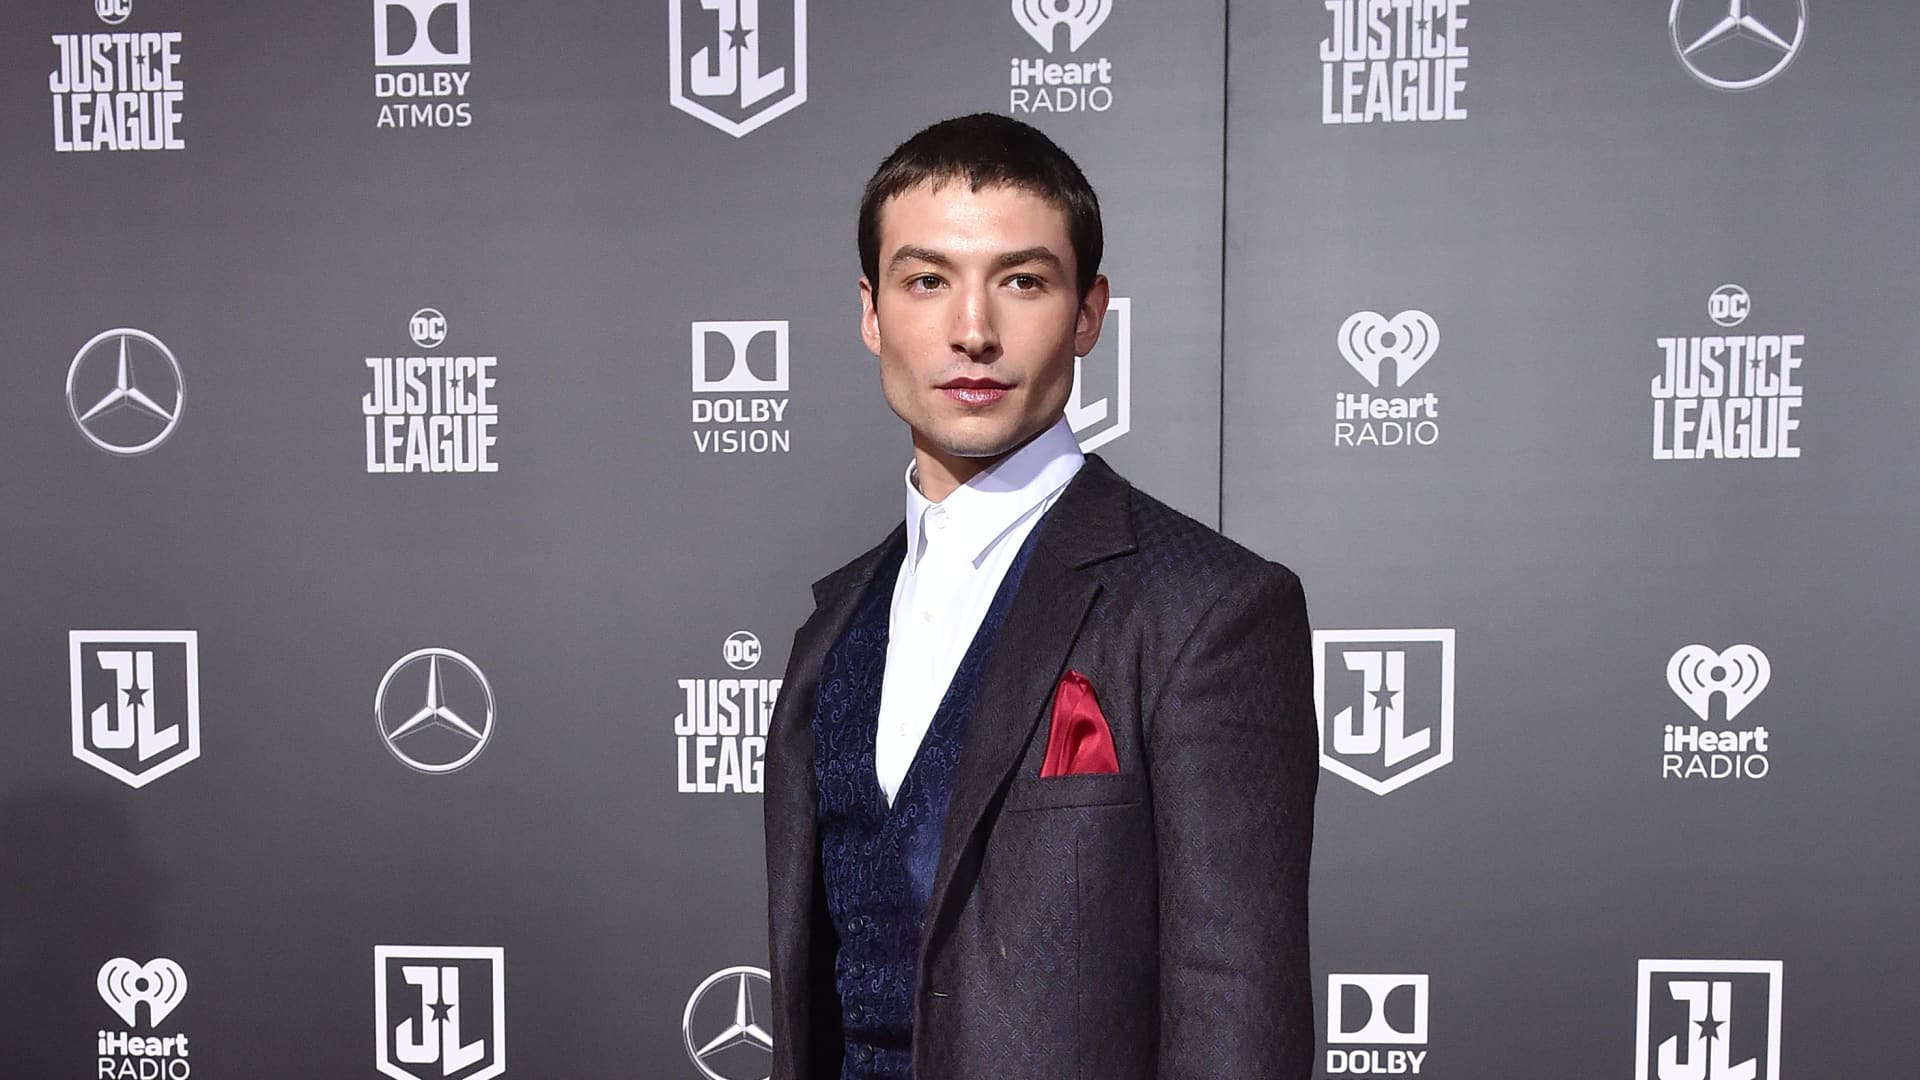 ‘Flash’ star Ezra Miller’s apology is not a get-out-of-jail-free card, experts say